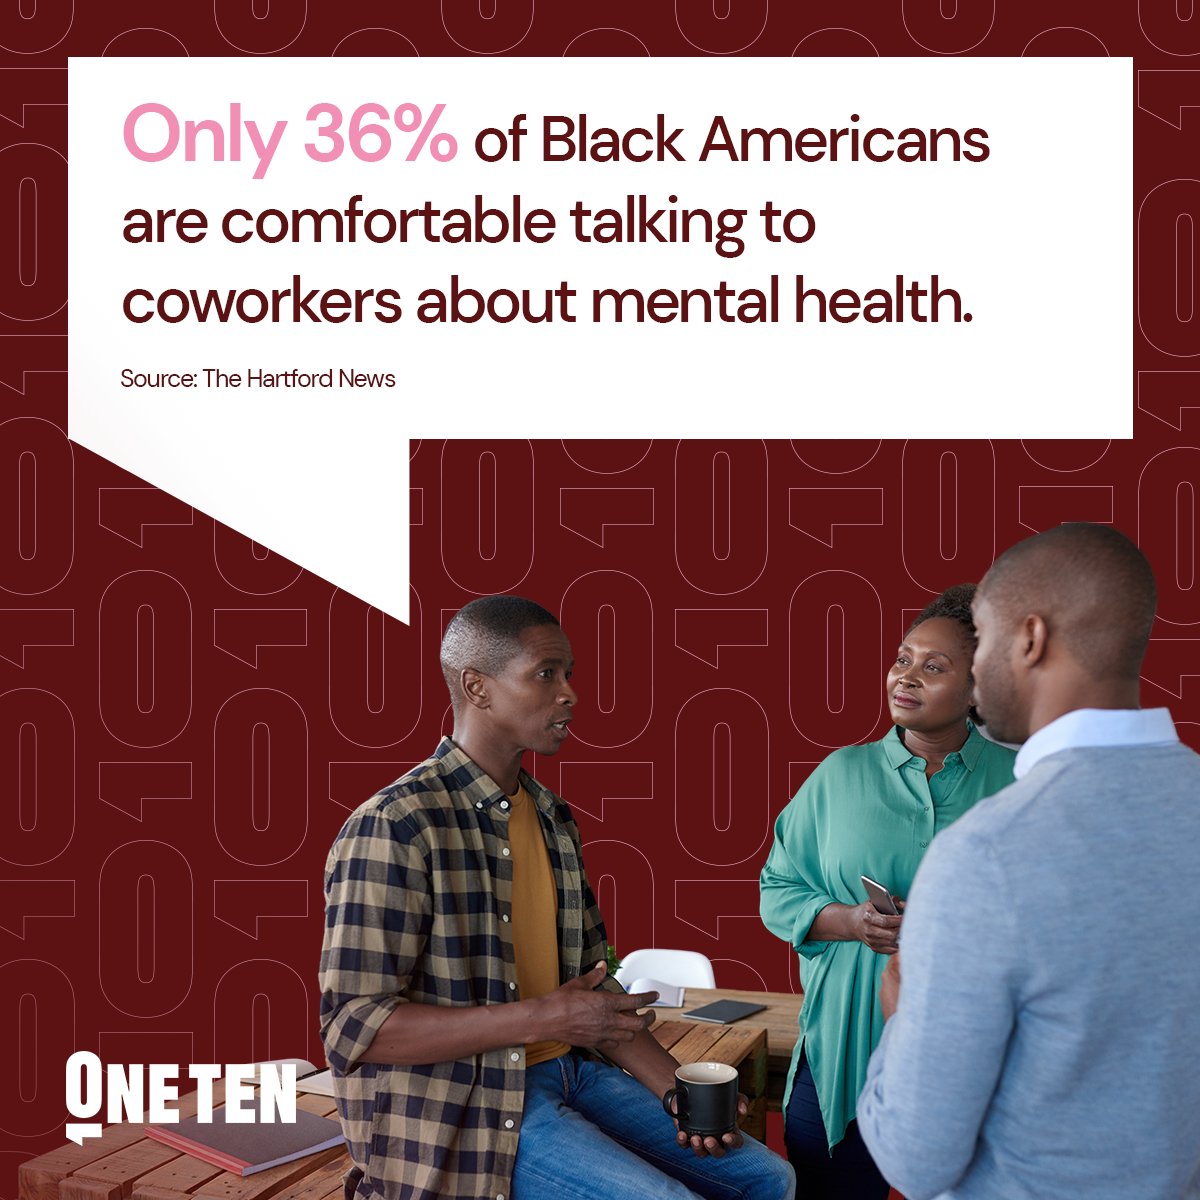 This #MentalHealthAwarenessMonth, we're raising awareness about the mental health disparities that continue to impact Black Americans in the workforce, as found in a recent @TheHartford study. Check out the study here to learn more: bit.ly/3Qzp1lM #HireSkillsFirst